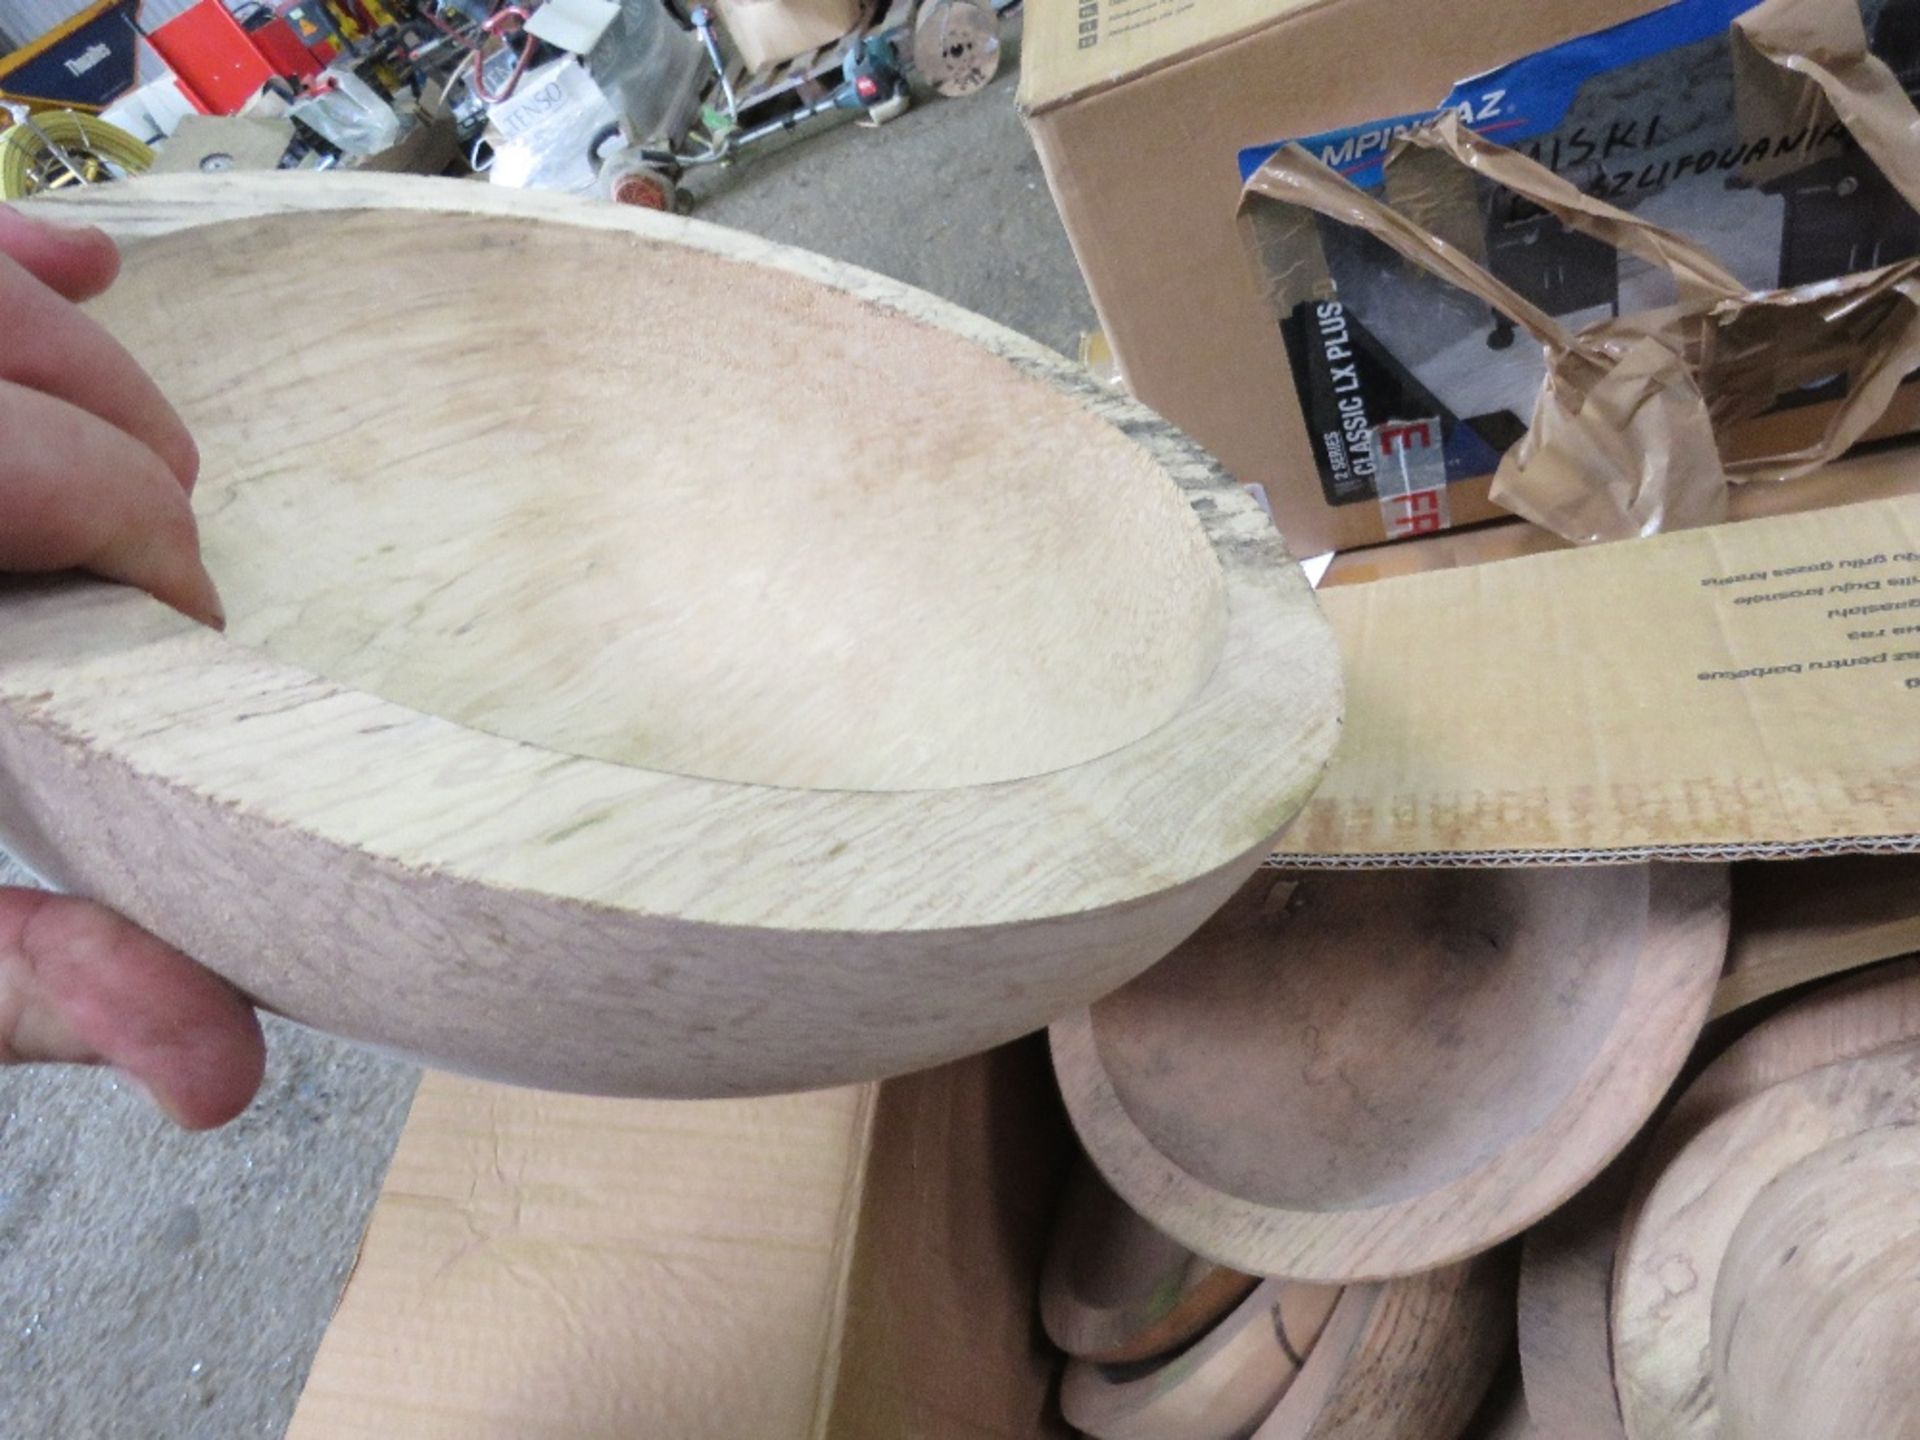 2 X BOXES CONTAINING TURNED WOODEN BOWL BLANKS. OWNER NO LONGER HAS THE TIME TO FINISH THEM. THI - Image 3 of 4